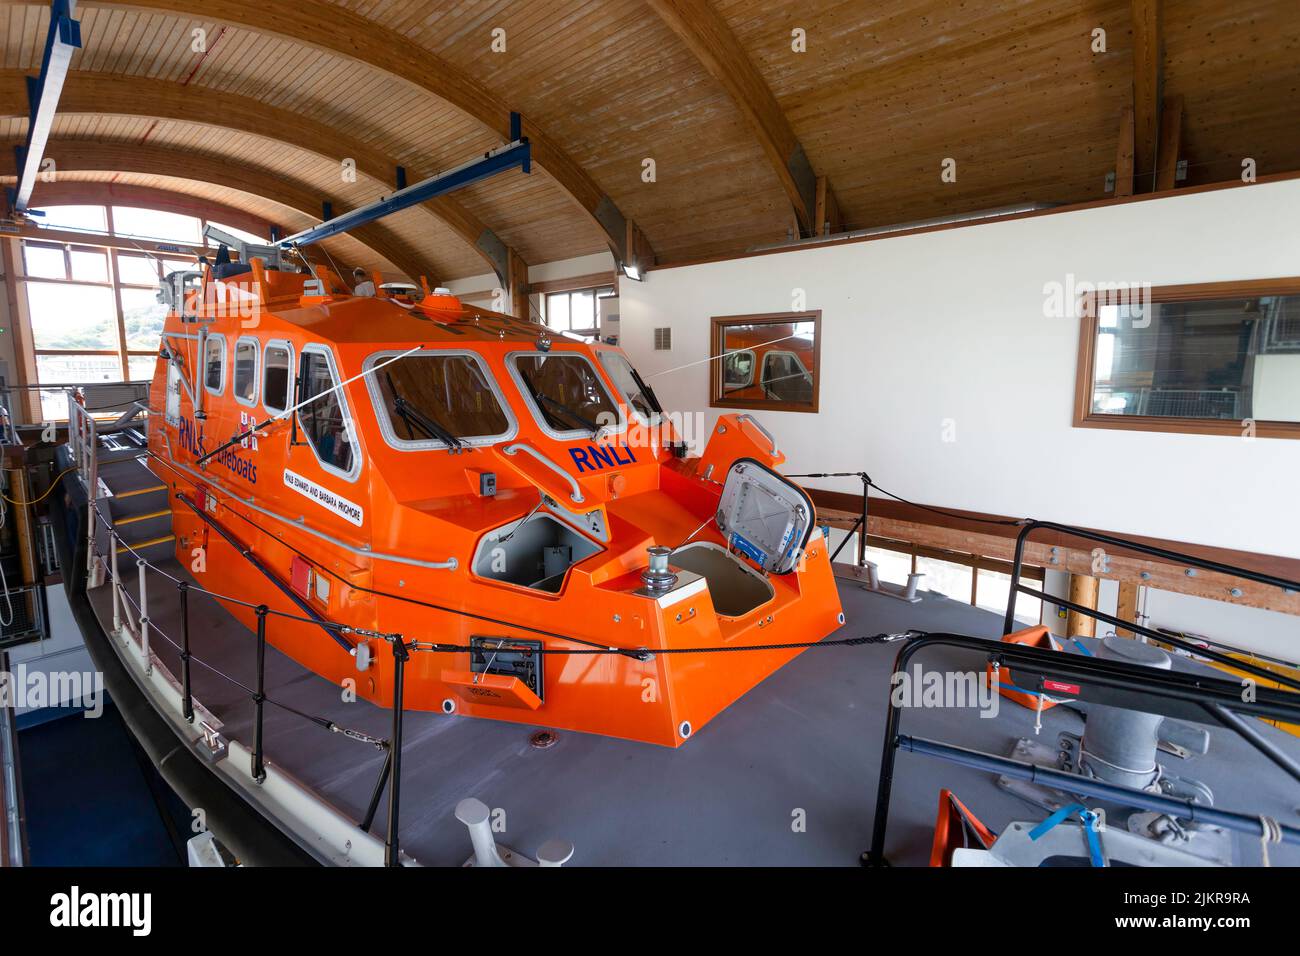 Editorial Swansea, UK - August 01, 2022:The RNLB Edward and Barbara Prigmore at the Mumbles lifeboat station on Mumbles Pier in Swansea, South Wales U Stock Photo